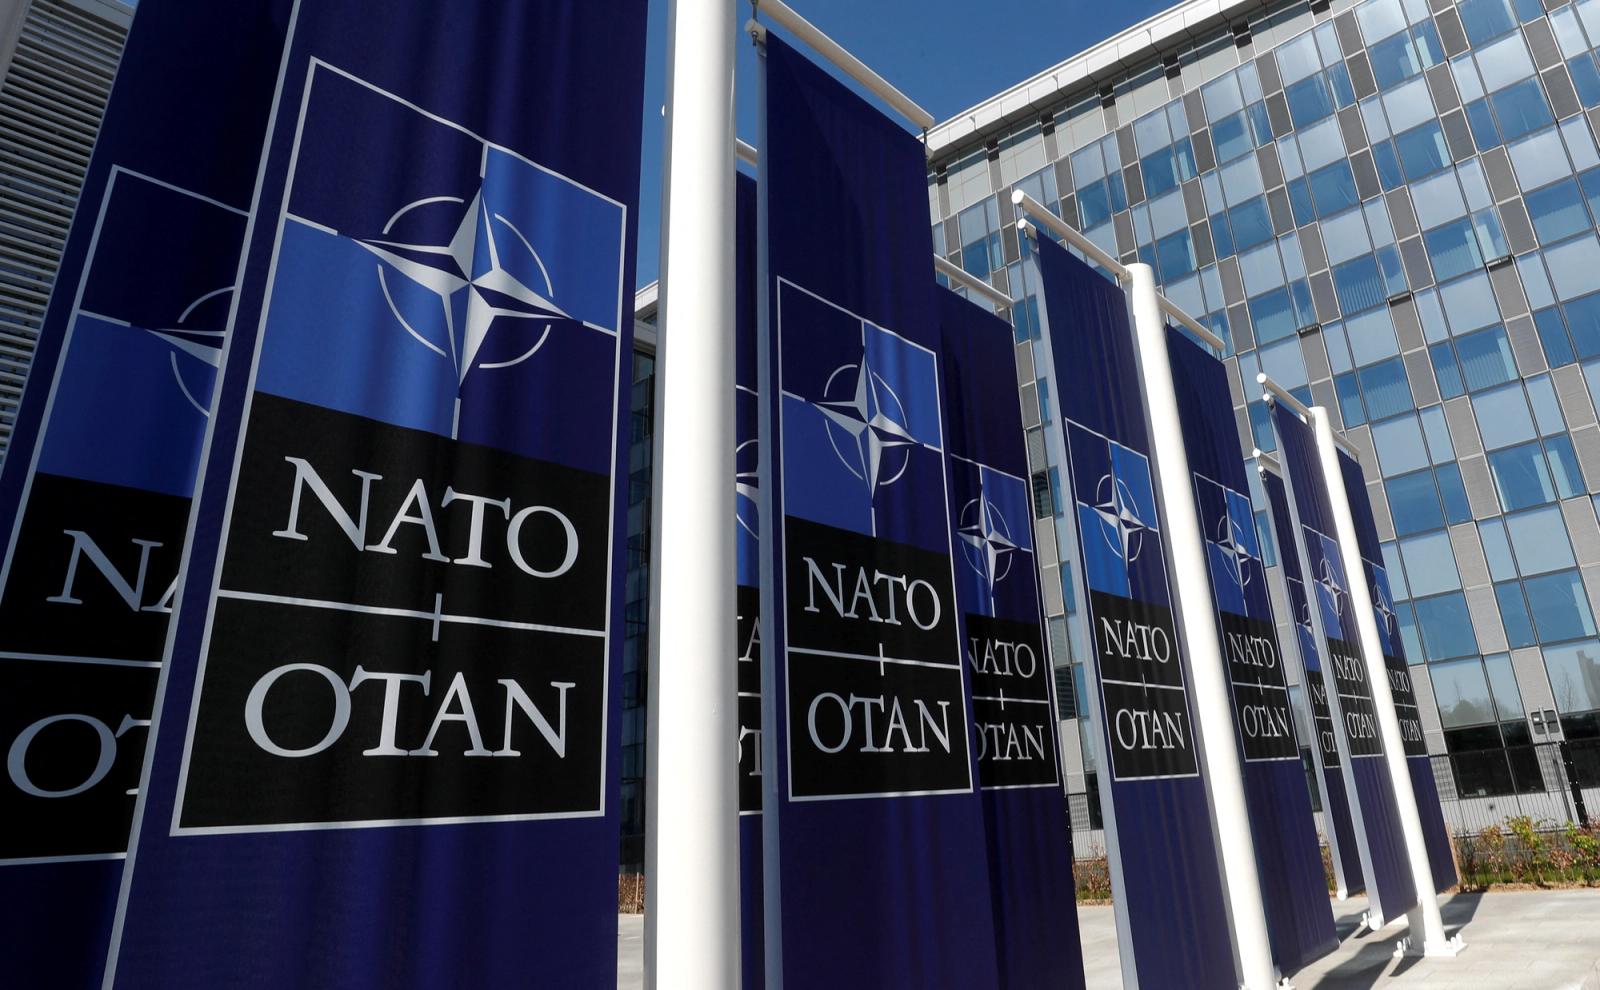 The NATO logo in Brussels.